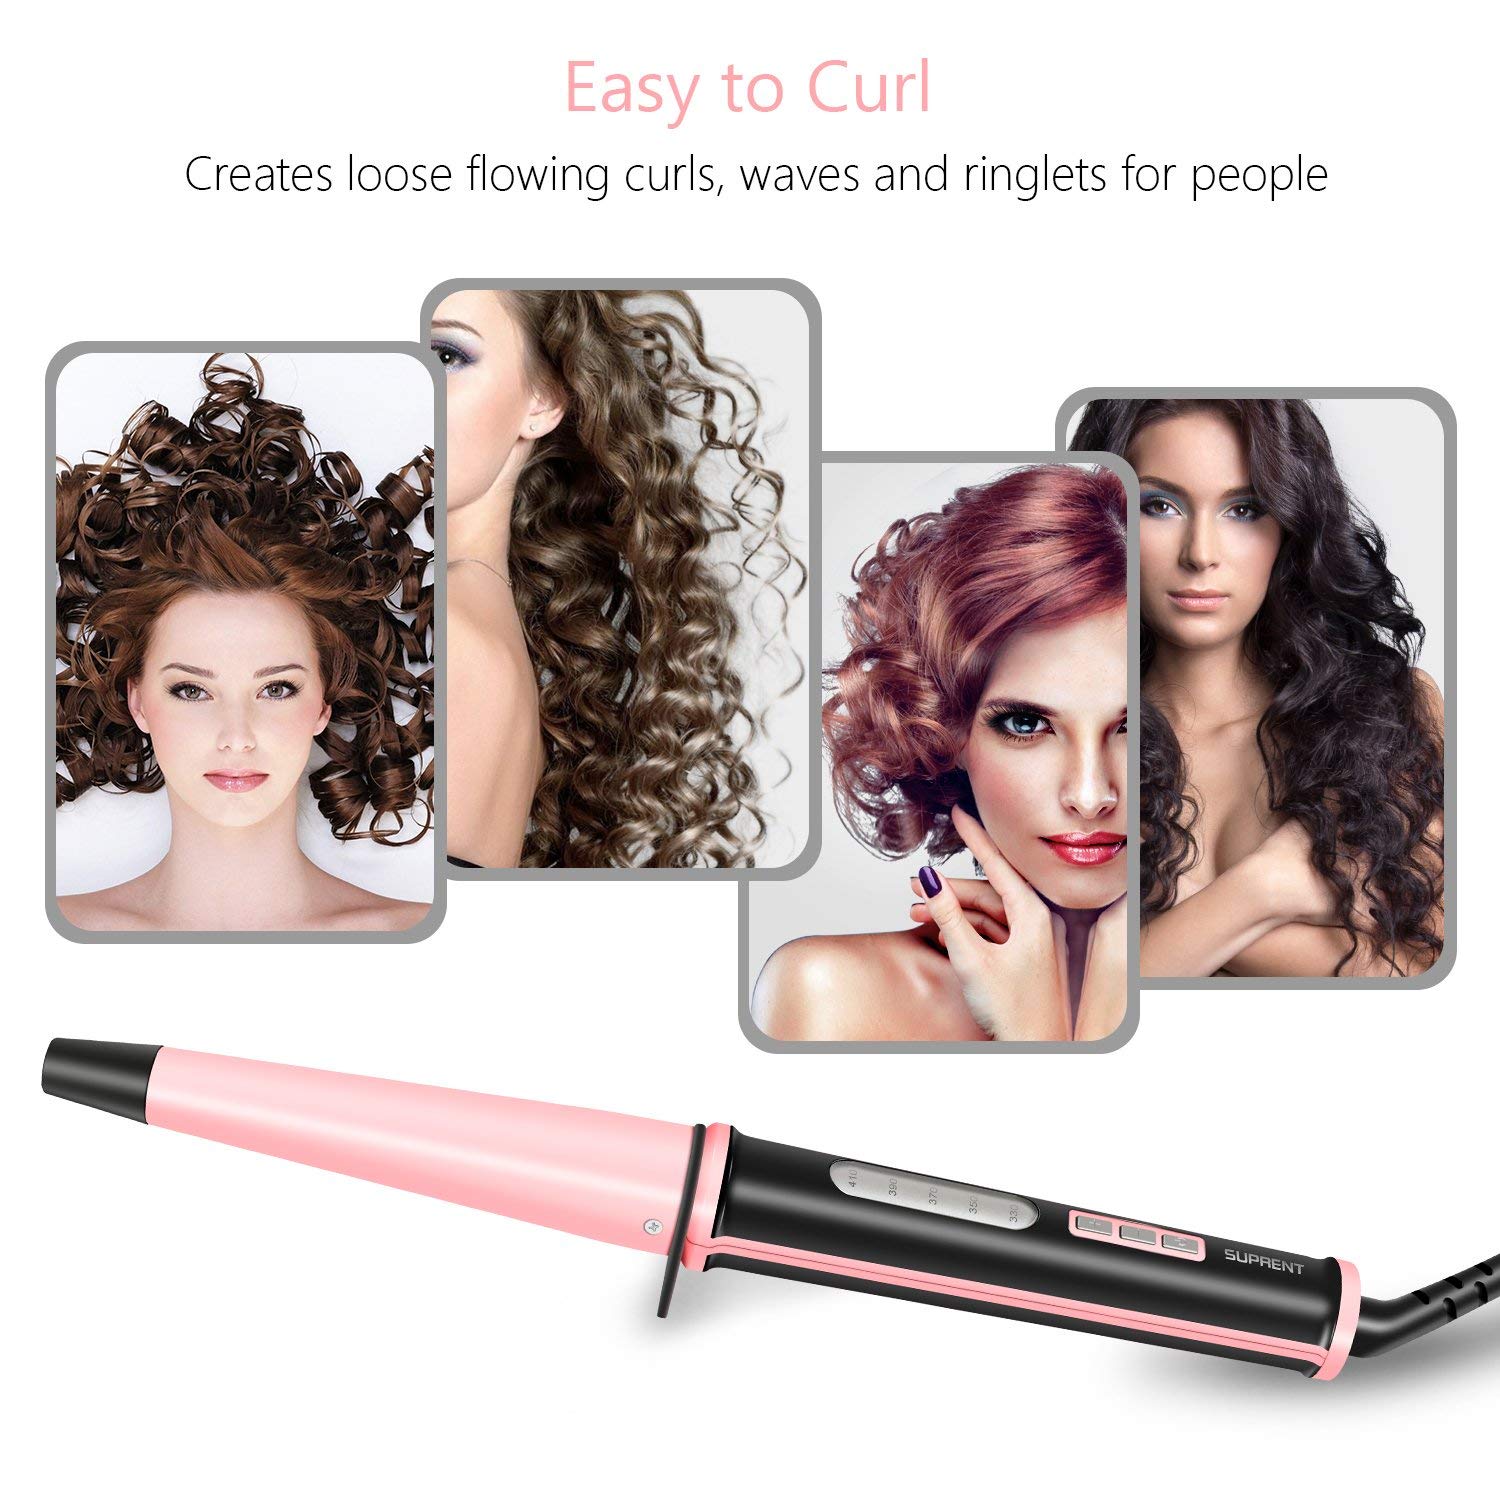 Suprent Hair Curling Wand Only $16.95 On Amazon!